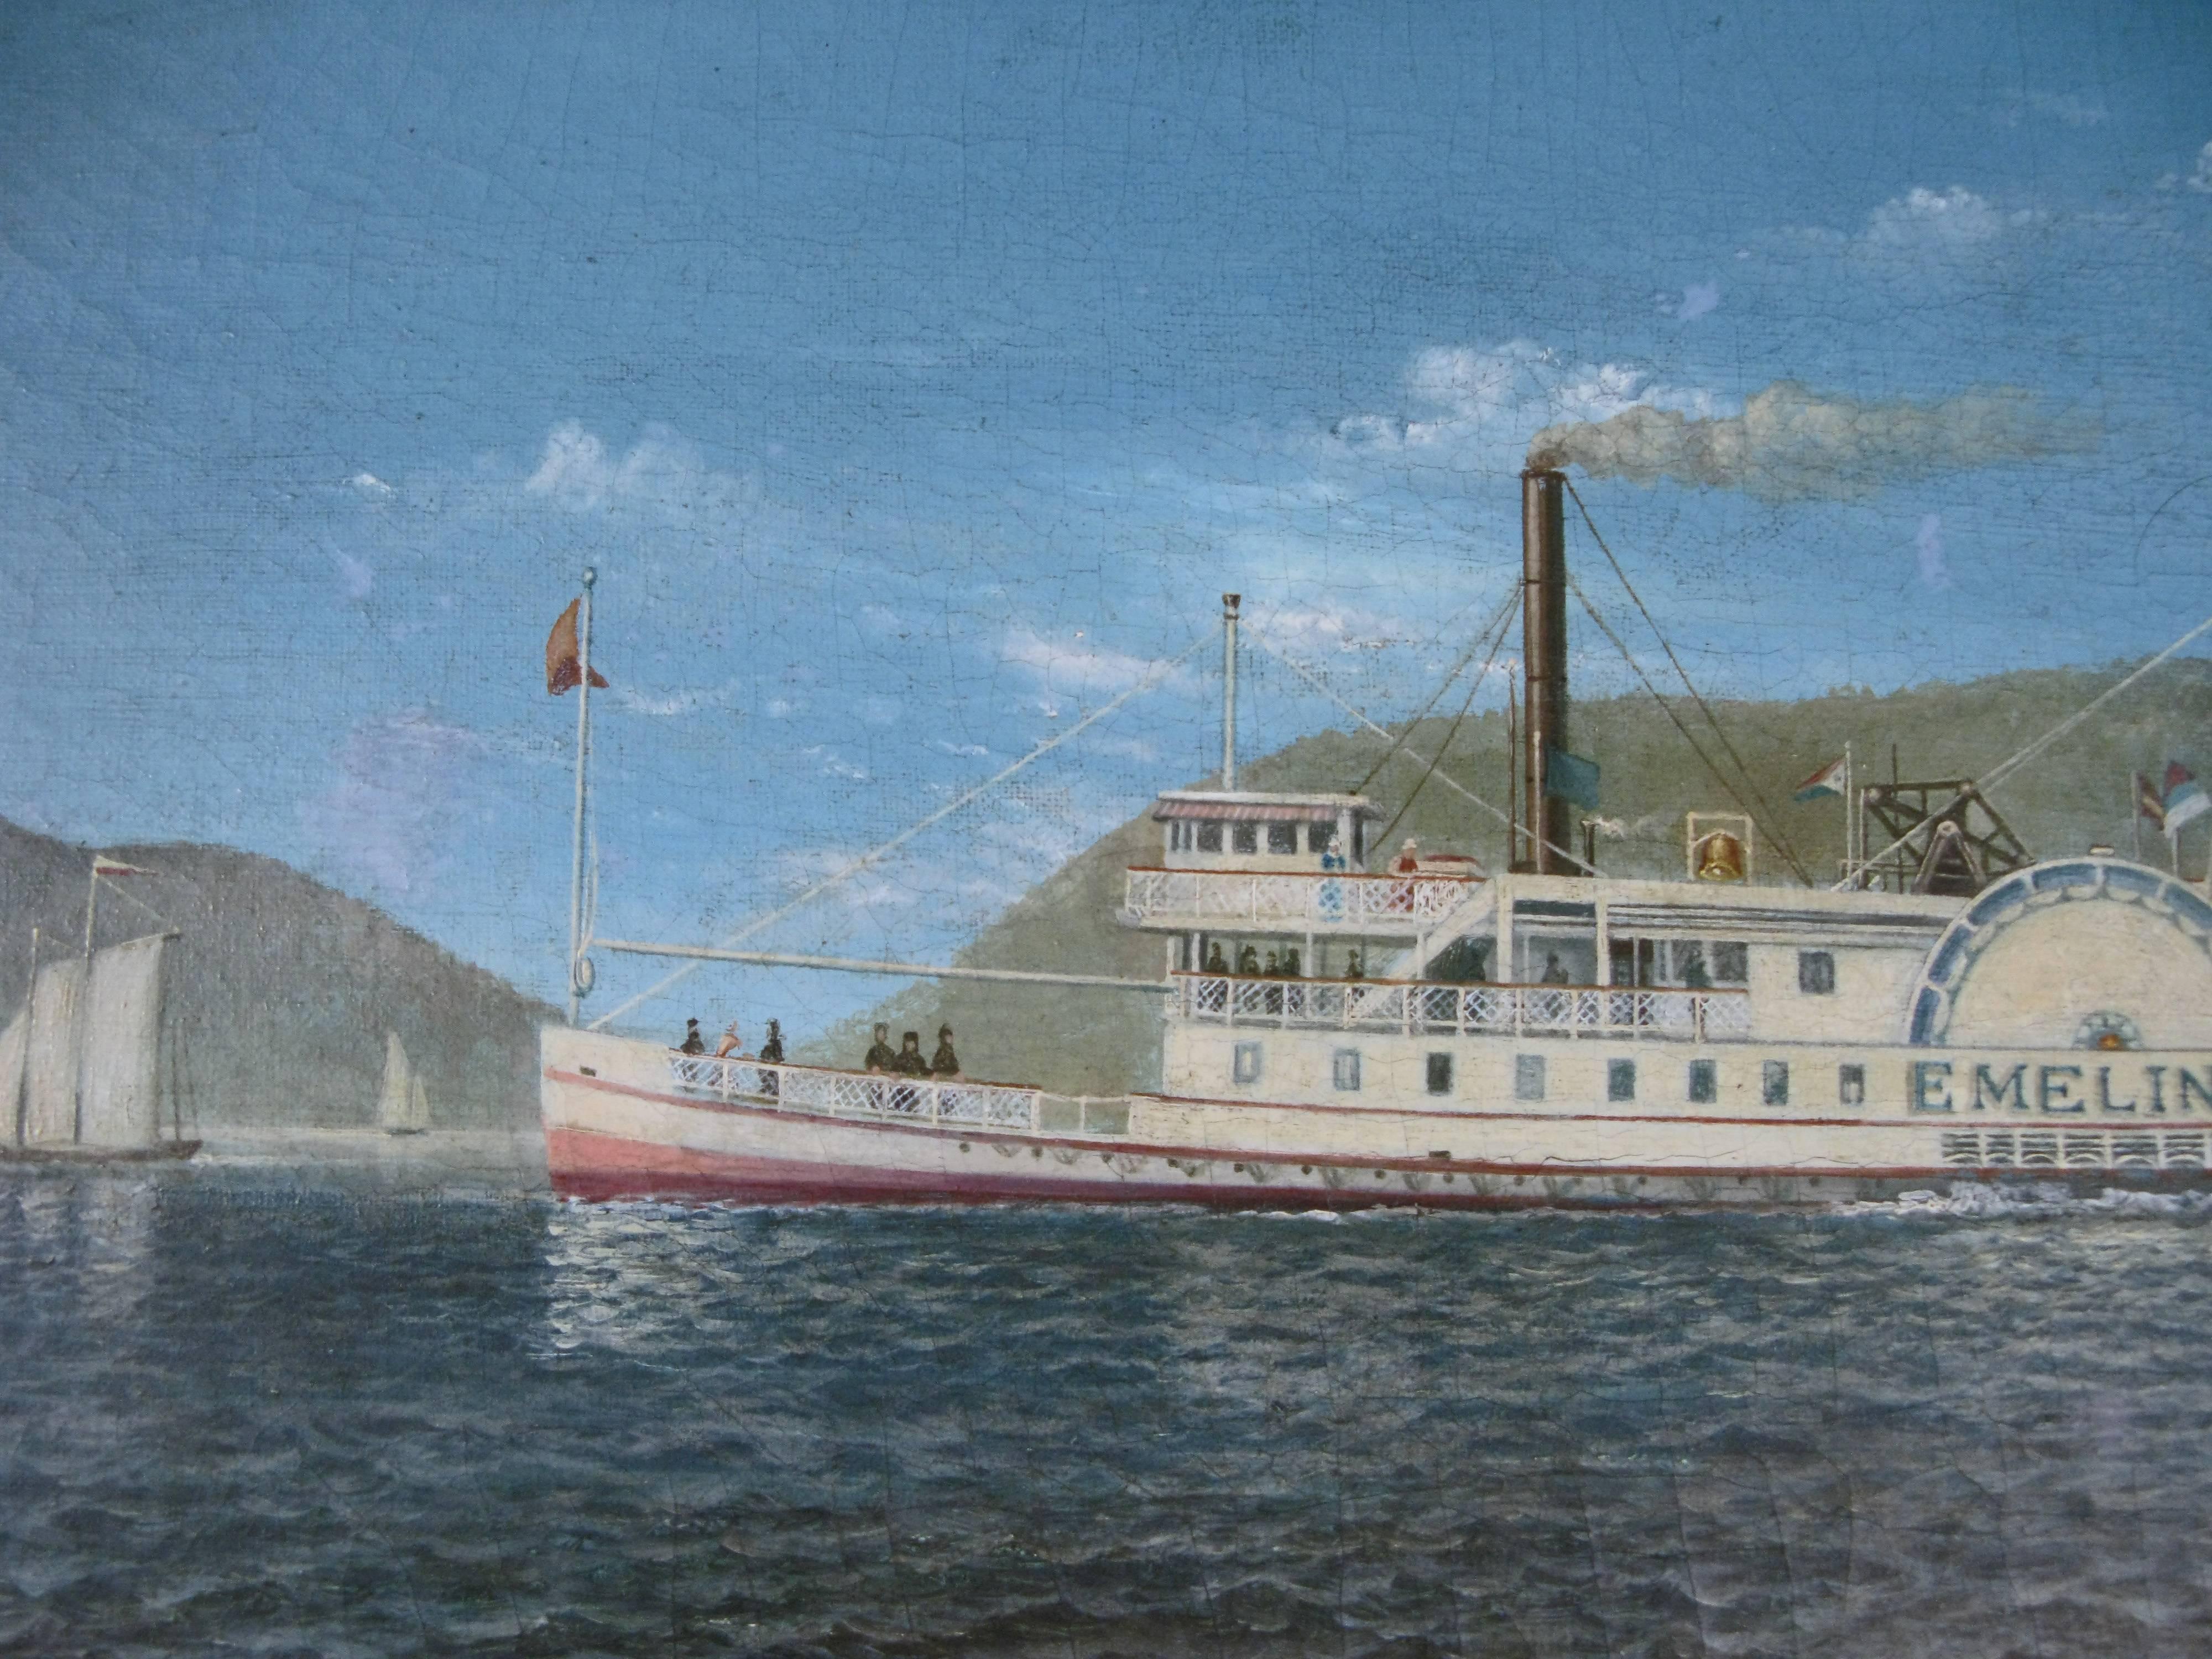 A very well done and charming oil on canvas painting of a paddle wheel steamer on the Hudson River done by noted artist Albert Nemethy. Albert was the scion of a family of painters from the Catskill Mountains. this is a very good example of Albert's